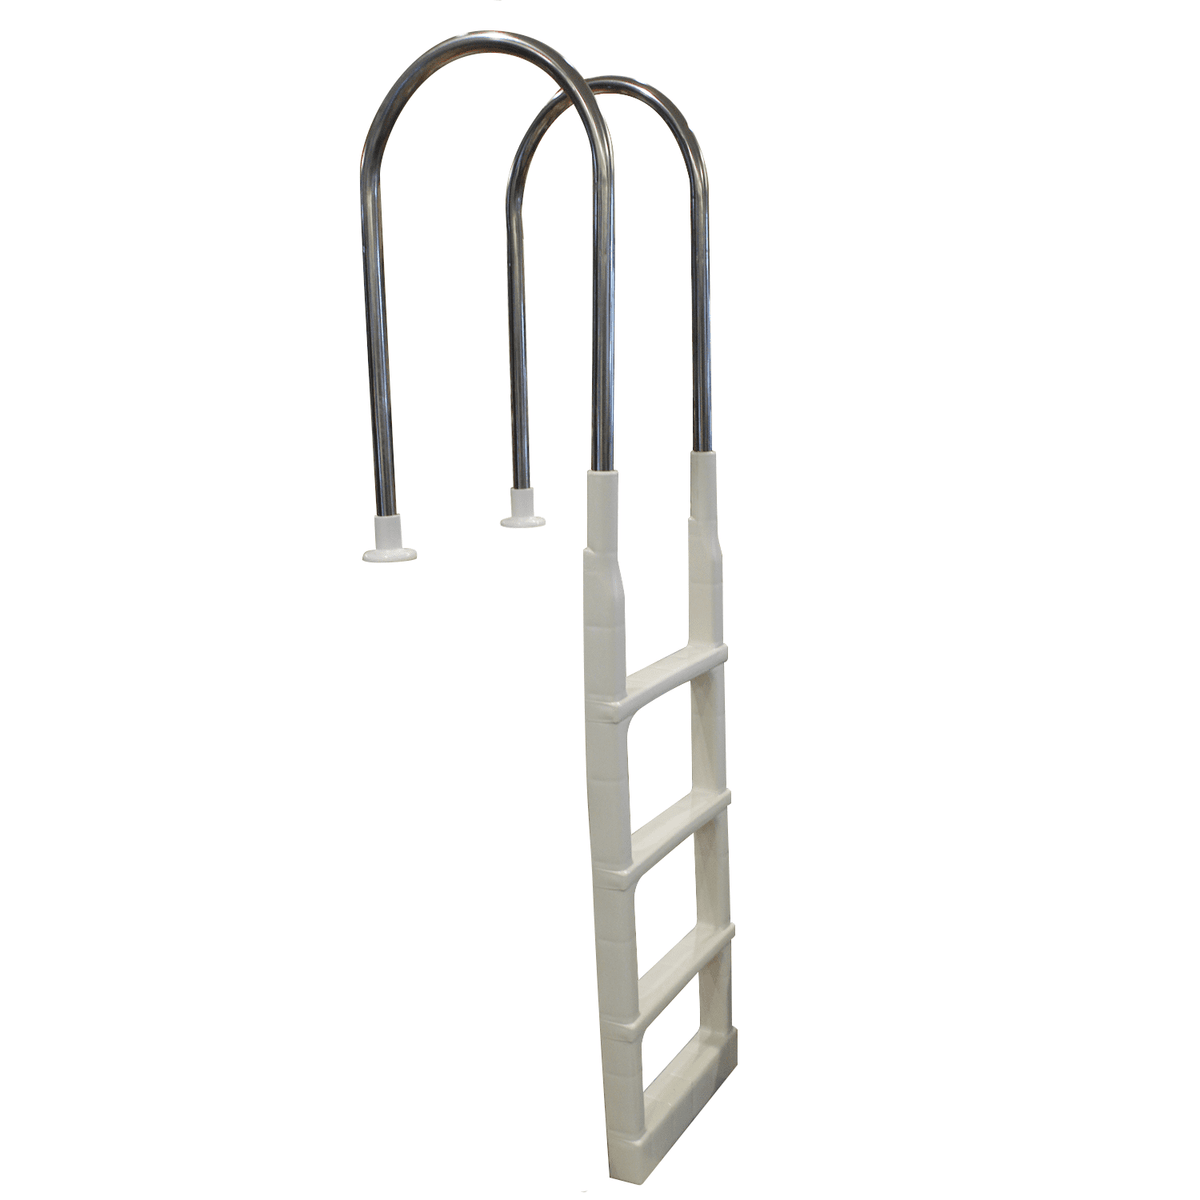 In Pool Deck Ladder with Stainless Steel Handles for Above Ground Pools